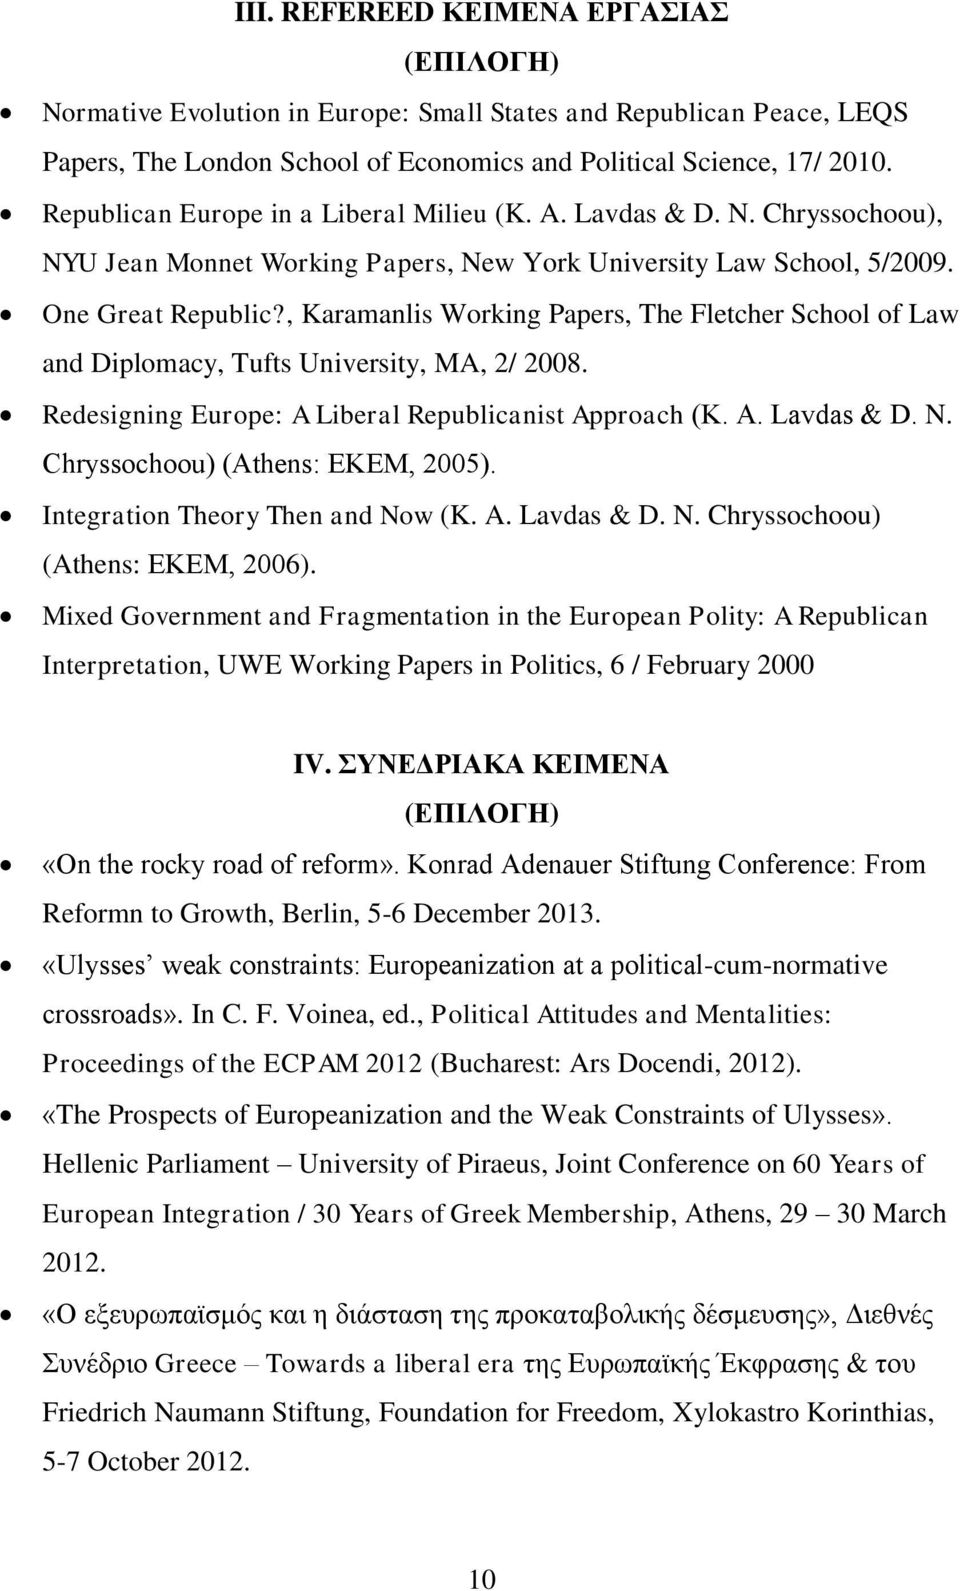 , Karamanlis Working Papers, The Fletcher School of Law and Diplomacy, Tufts University, MA, 2/ 2008. Redesigning Europe: A Liberal Republicanist Approach (Κ. Α. Lavdas & D. N.